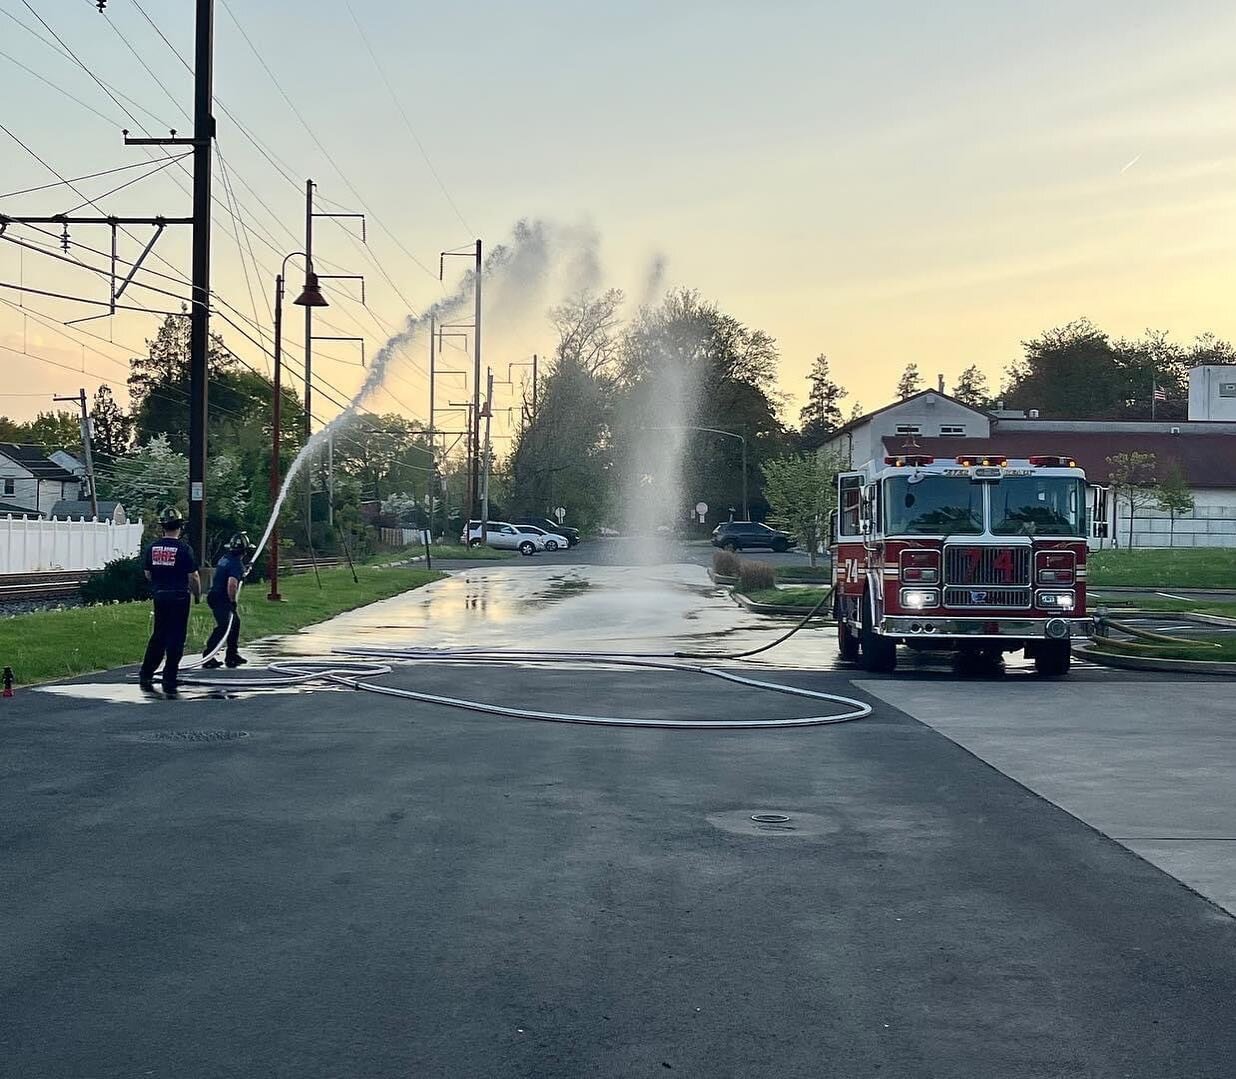 74A flowing some water this evening. Putting their new @keyfirehose and @elkhartbrass nozzles through its paces. 
#udfd #upperdarby #elkhartbrass #keyfirehose #training